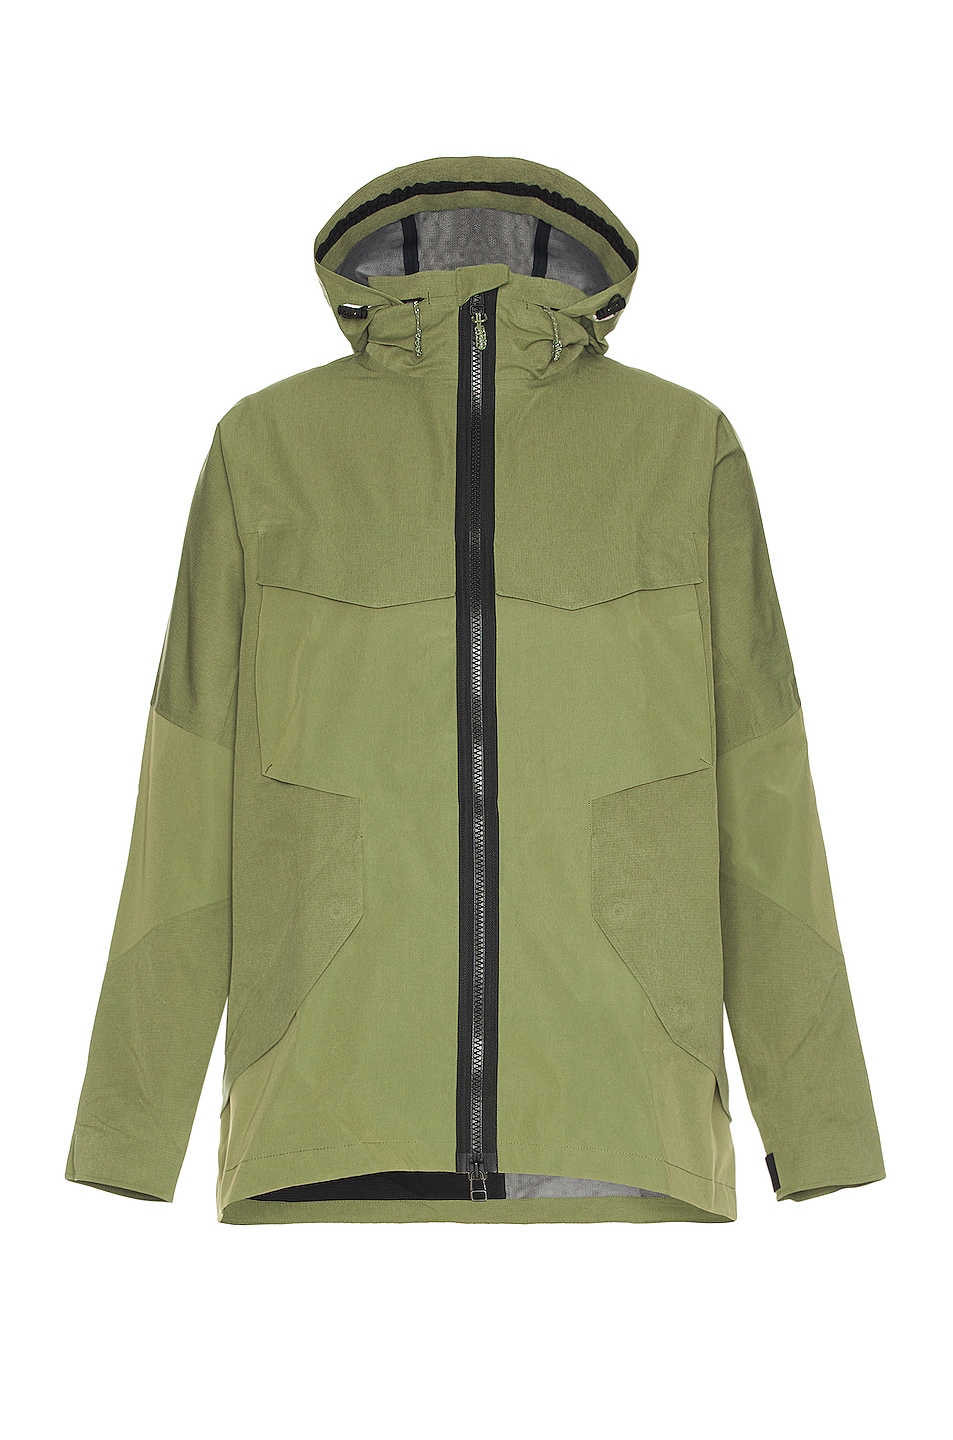 Image 1 of On Explorer Jacket in Taiga